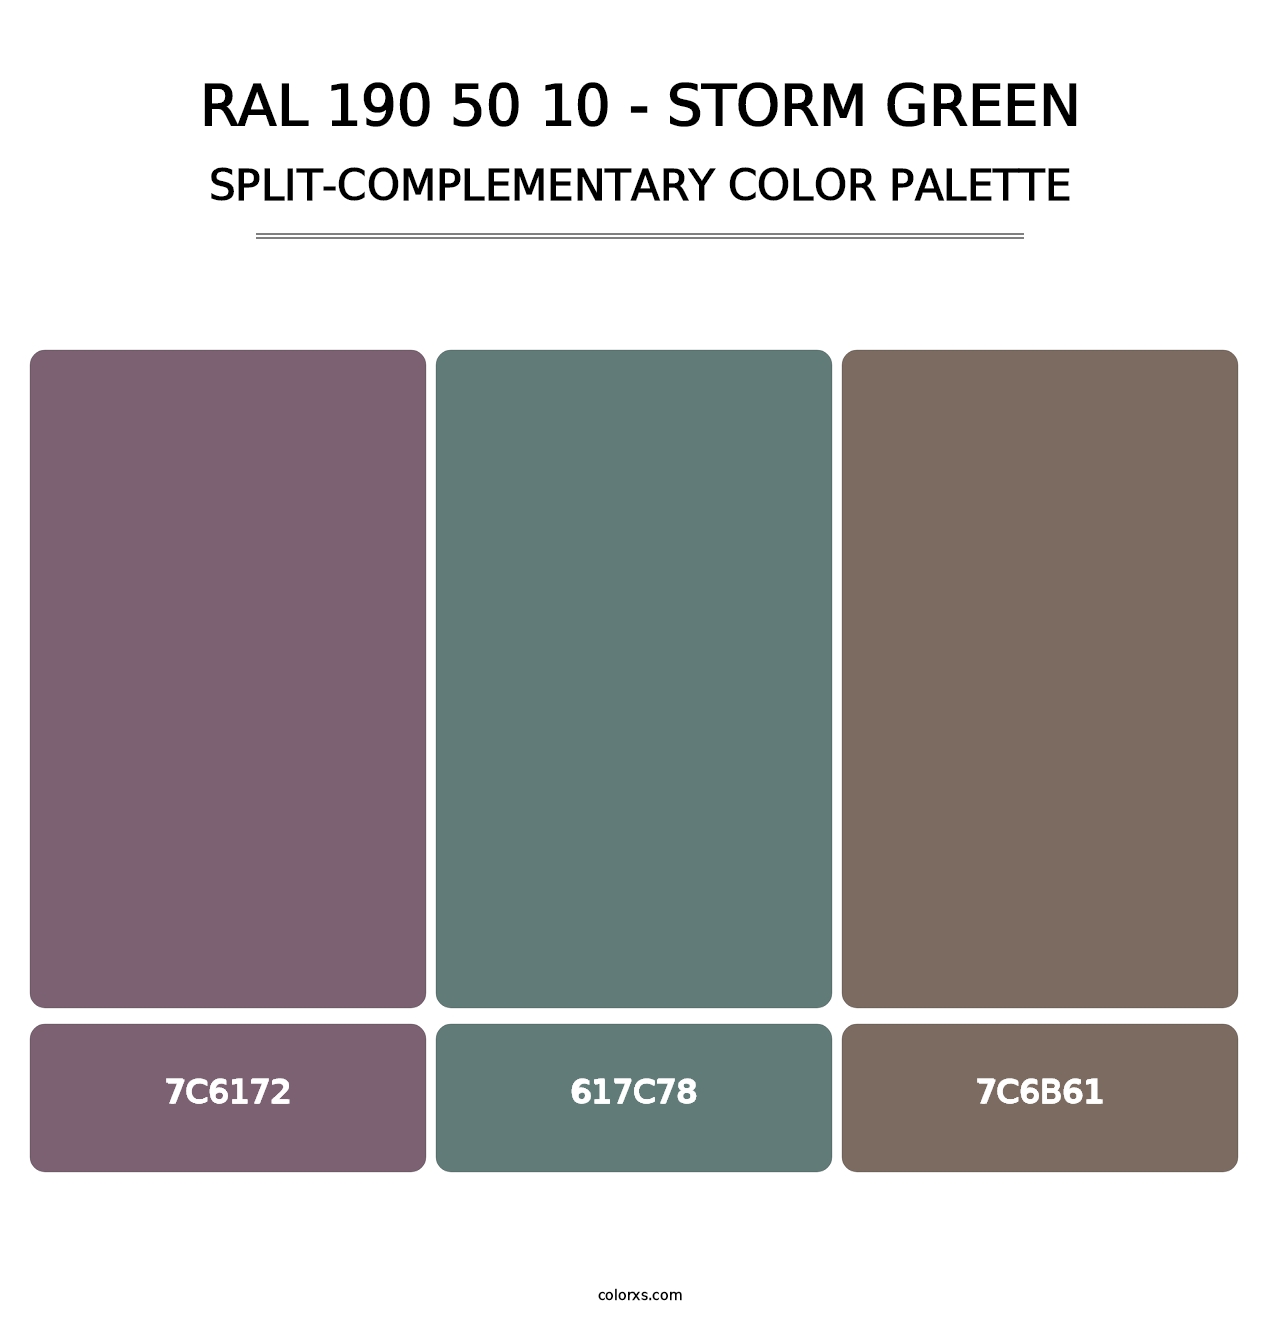 RAL 190 50 10 - Storm Green - Split-Complementary Color Palette